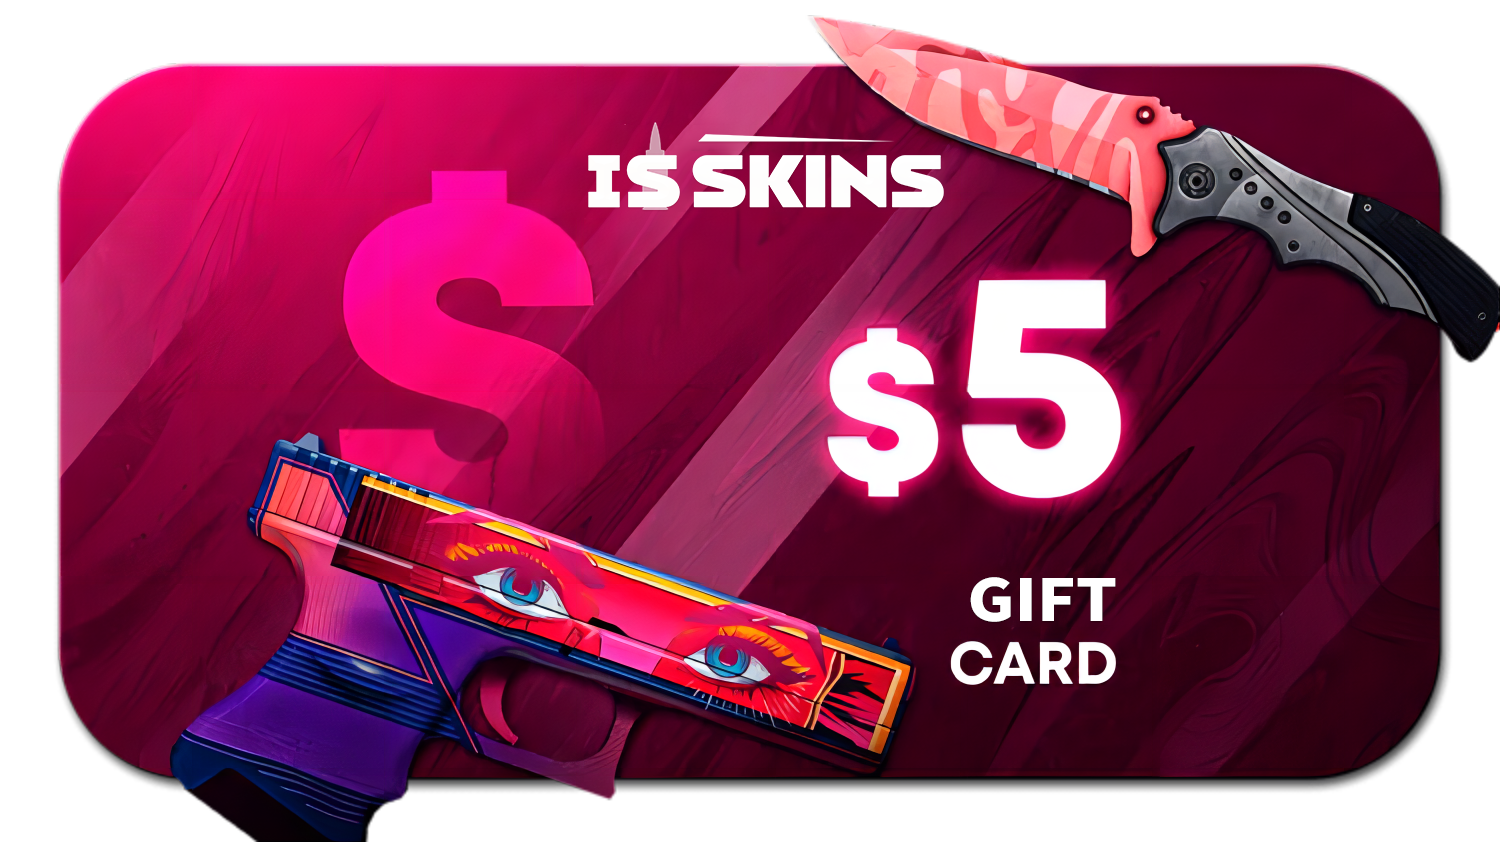 ISSKINS $5 Gift Card 5.29 USD